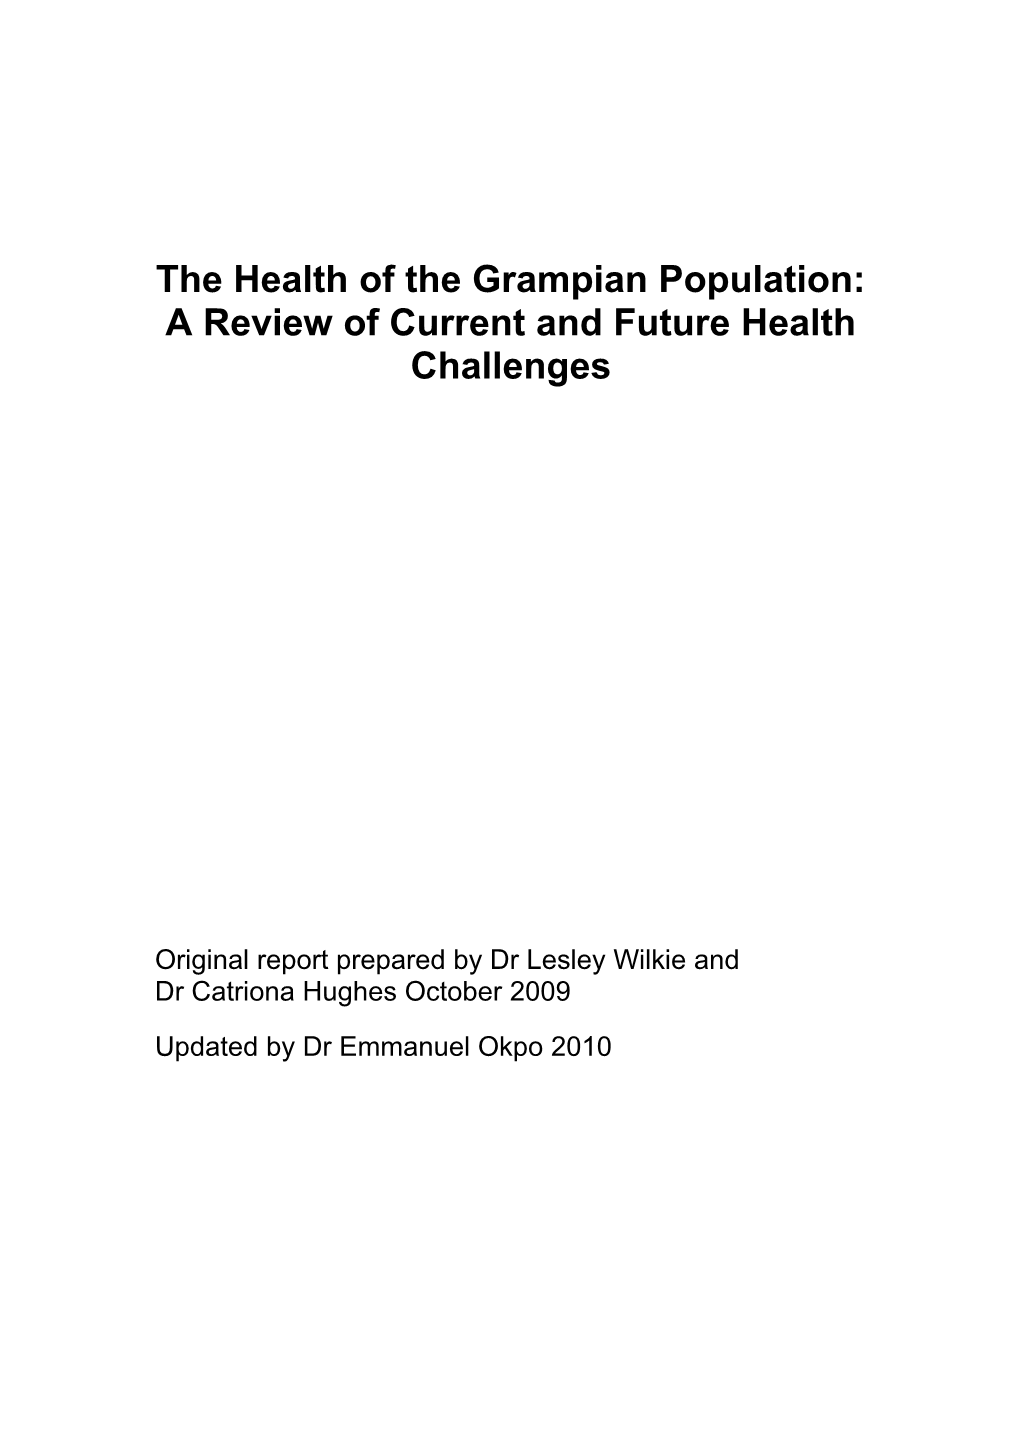 Item 6.1 for 7 Dec the Health of the Grampian Population Briefing Paper